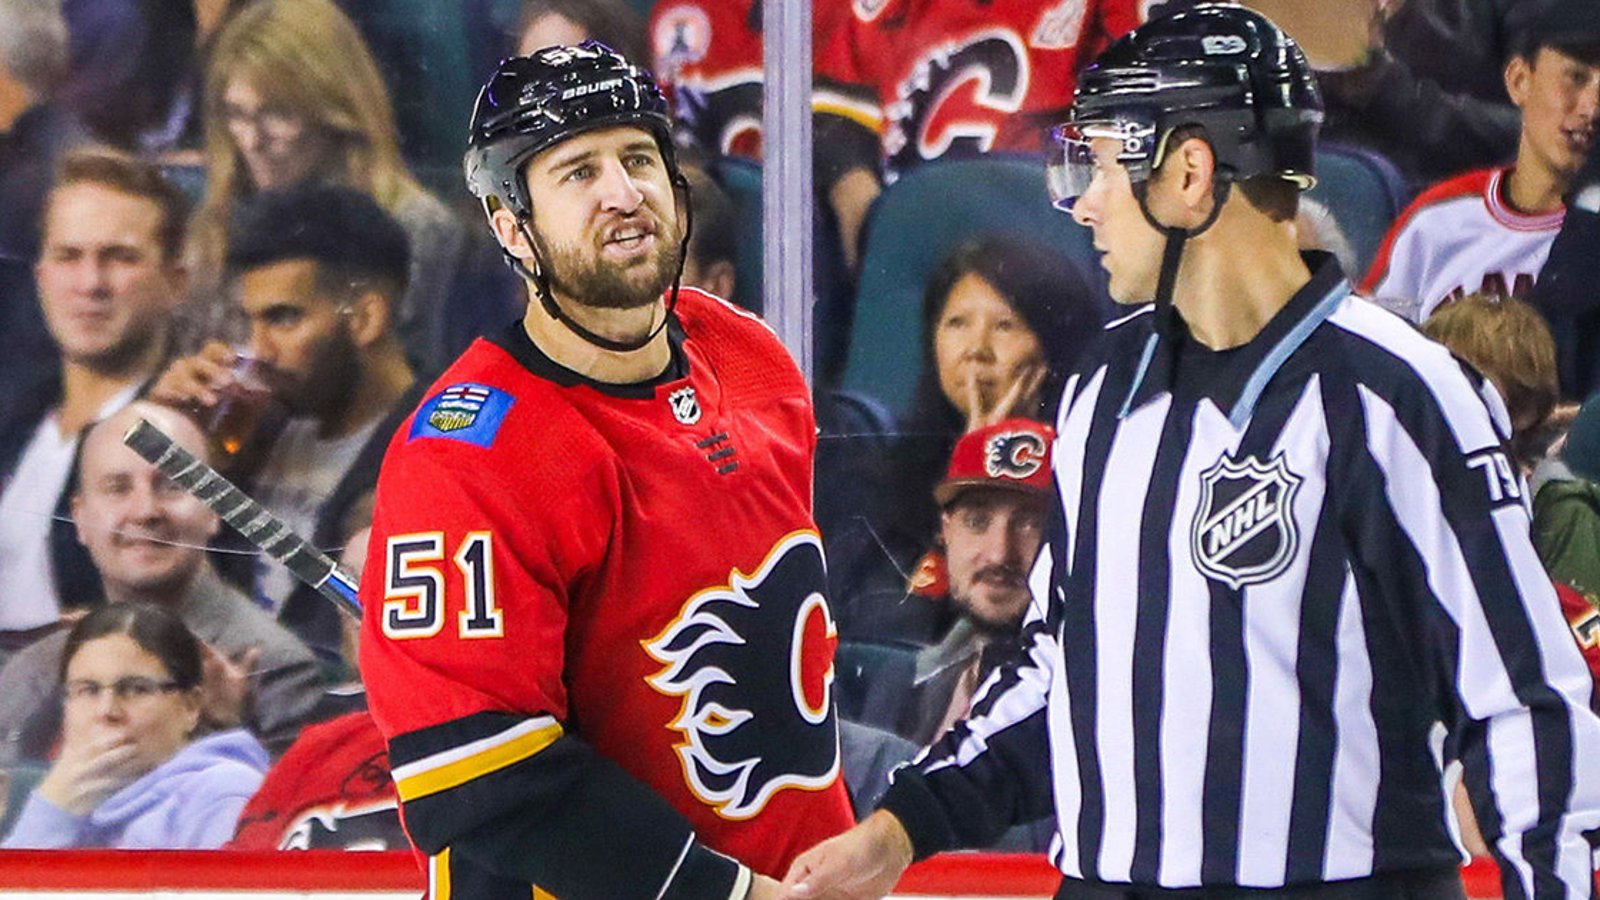 Breaking: Flames place veteran Glass on waivers